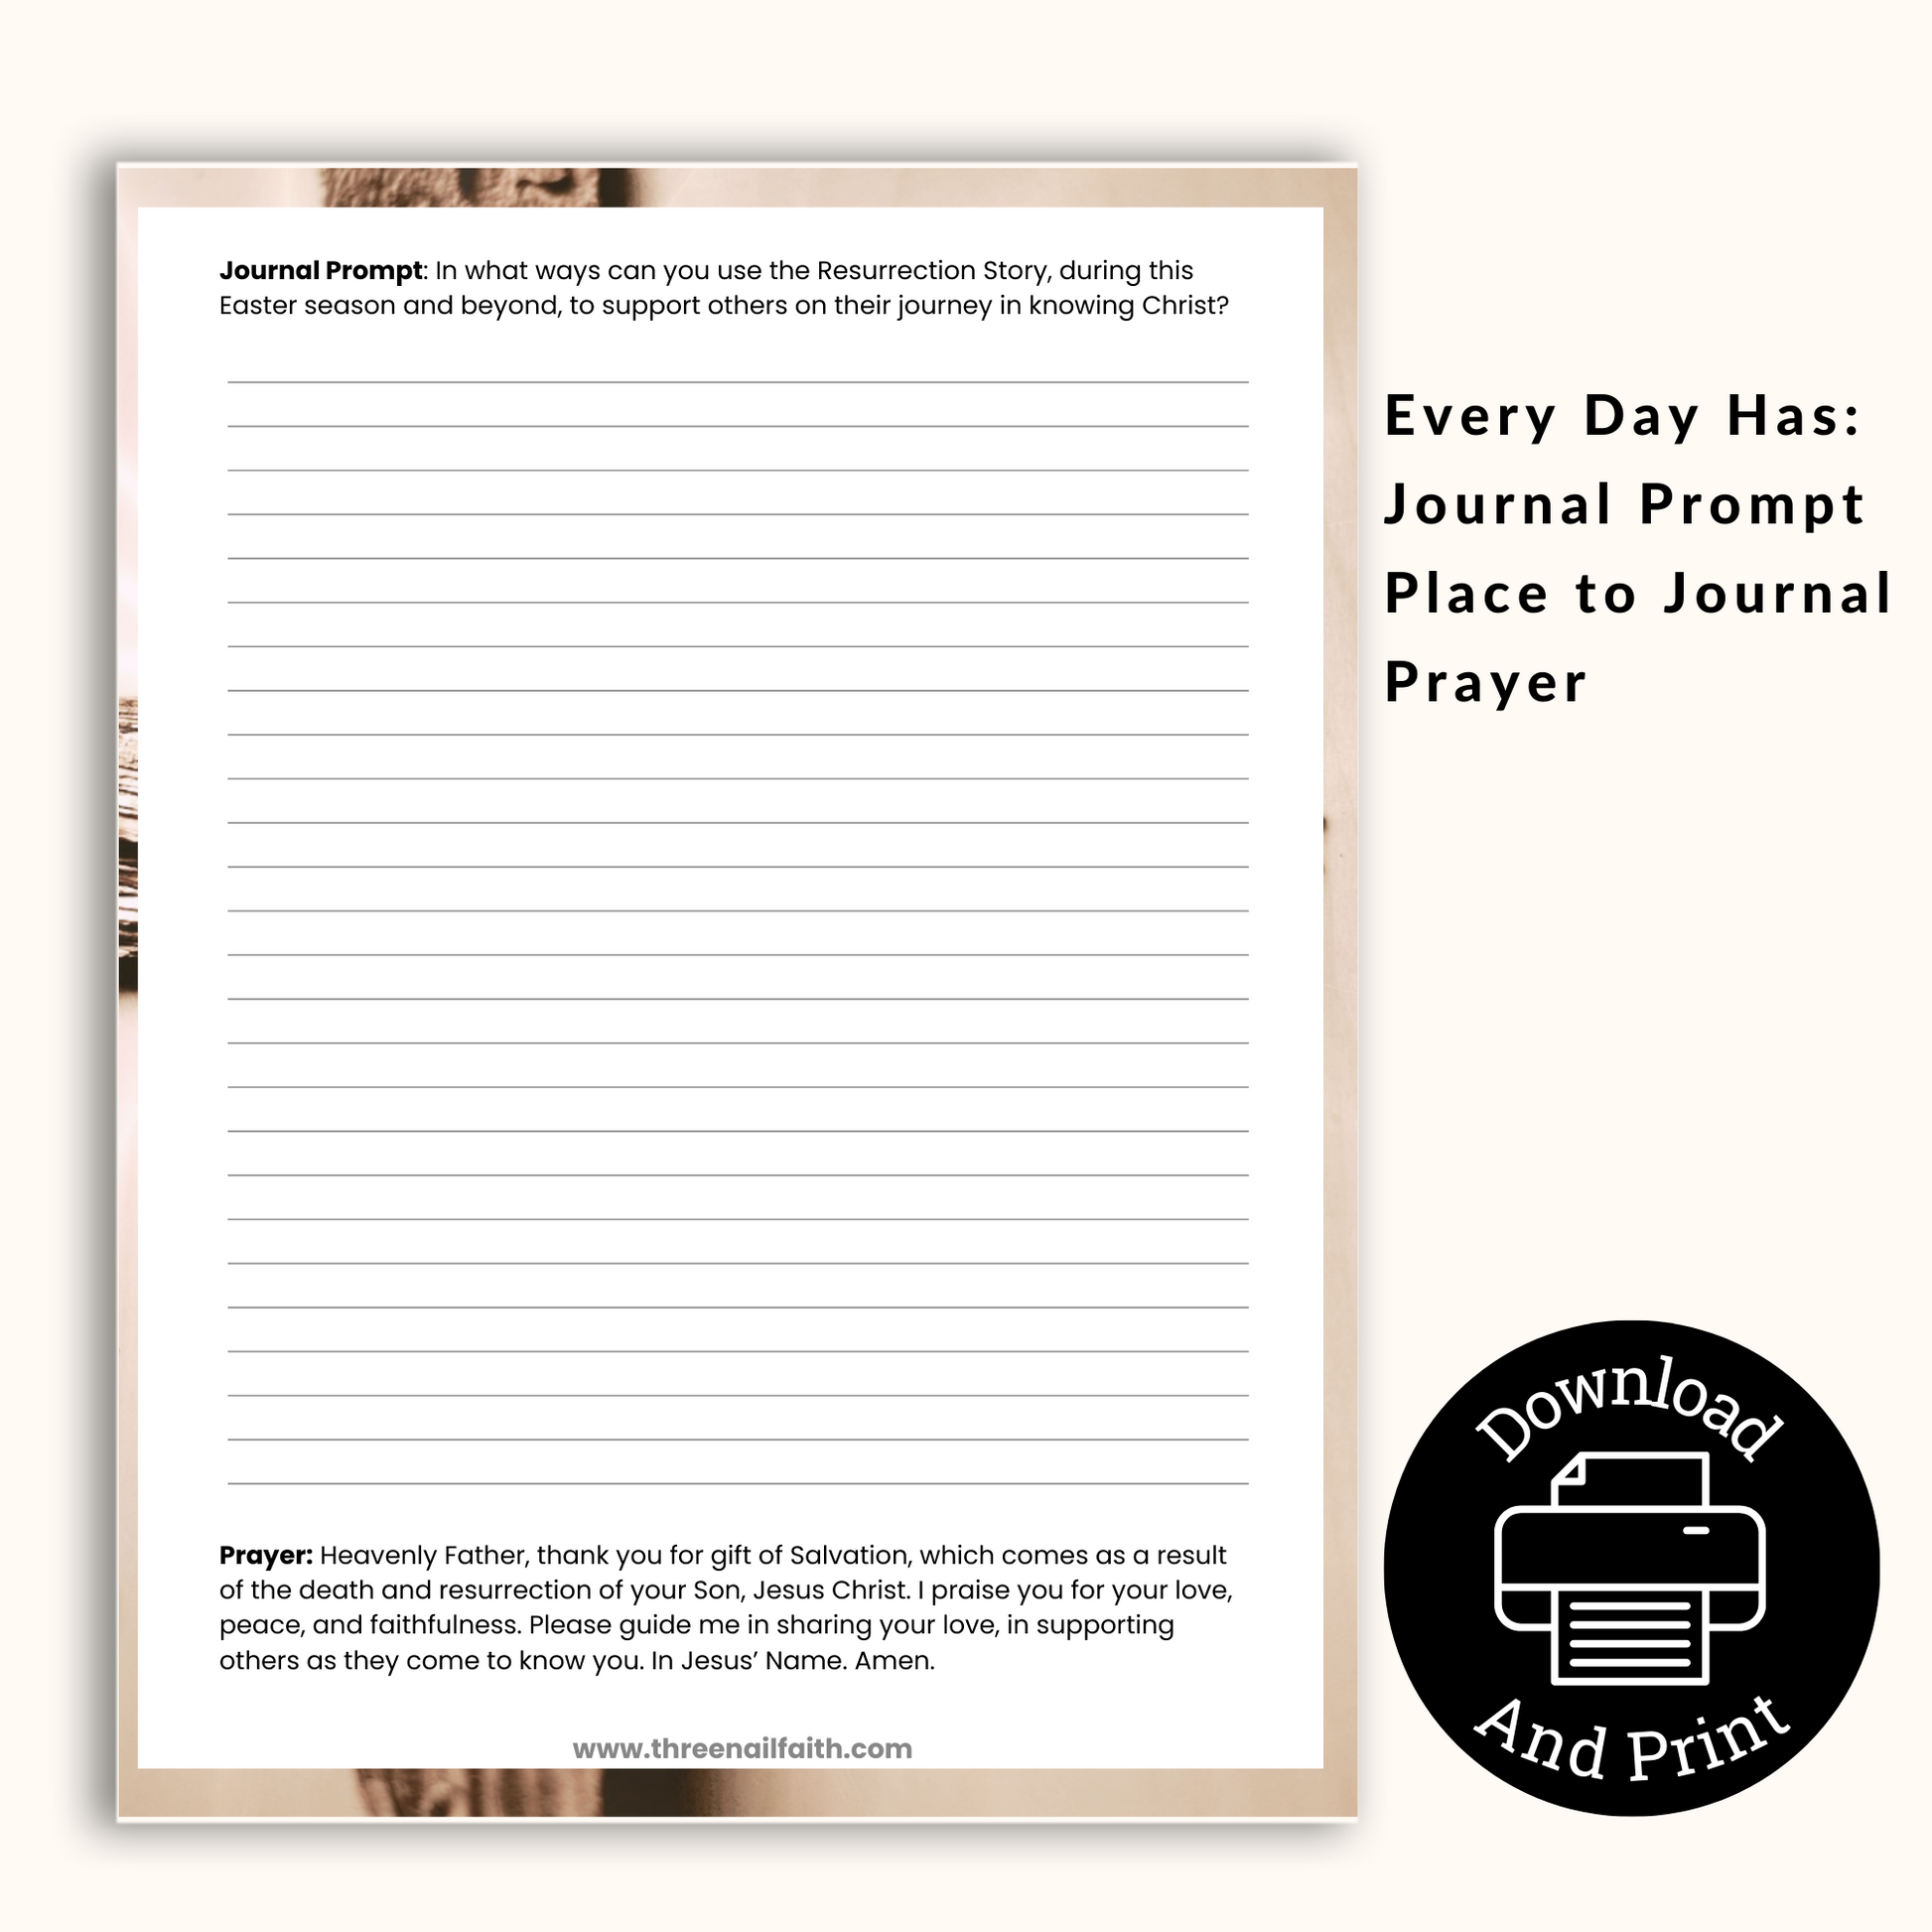 Every day has a journal prompt and place to journal and a prayer